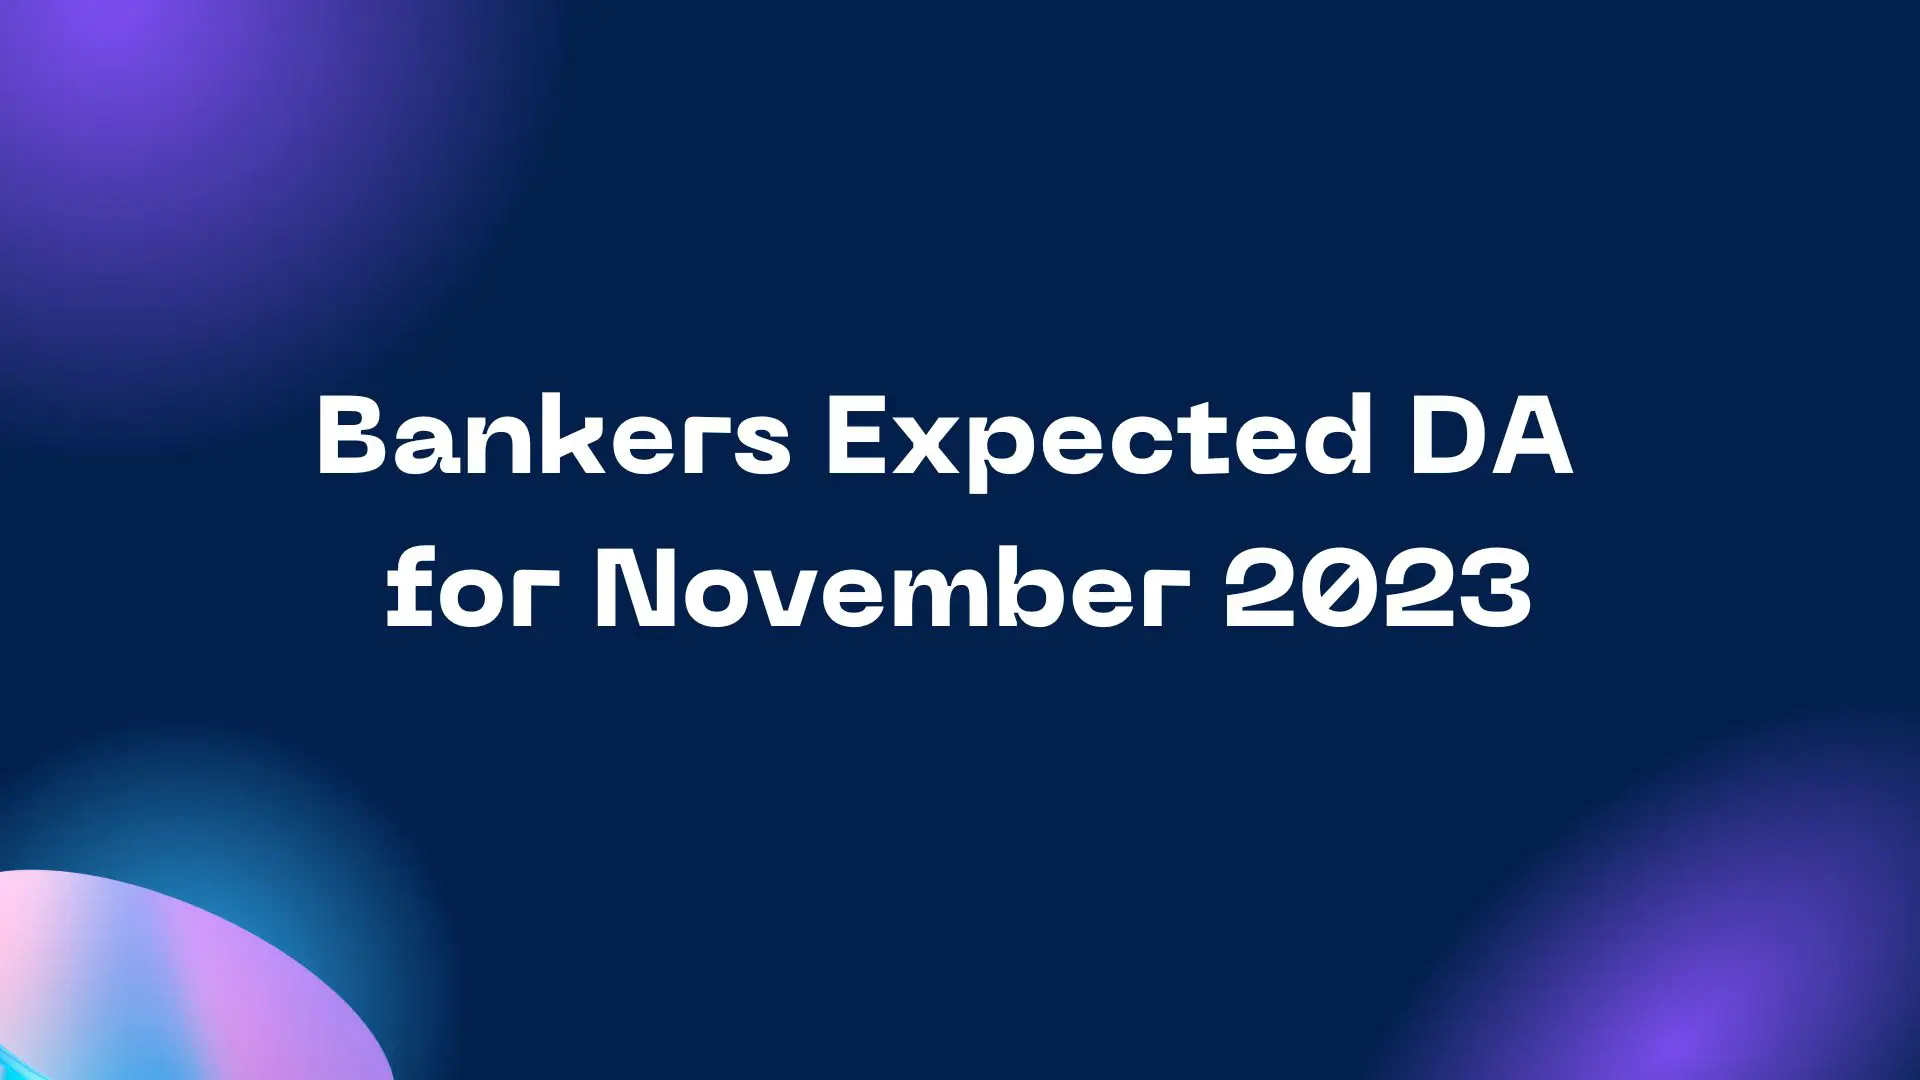 Bankers Expected DA for November 2023